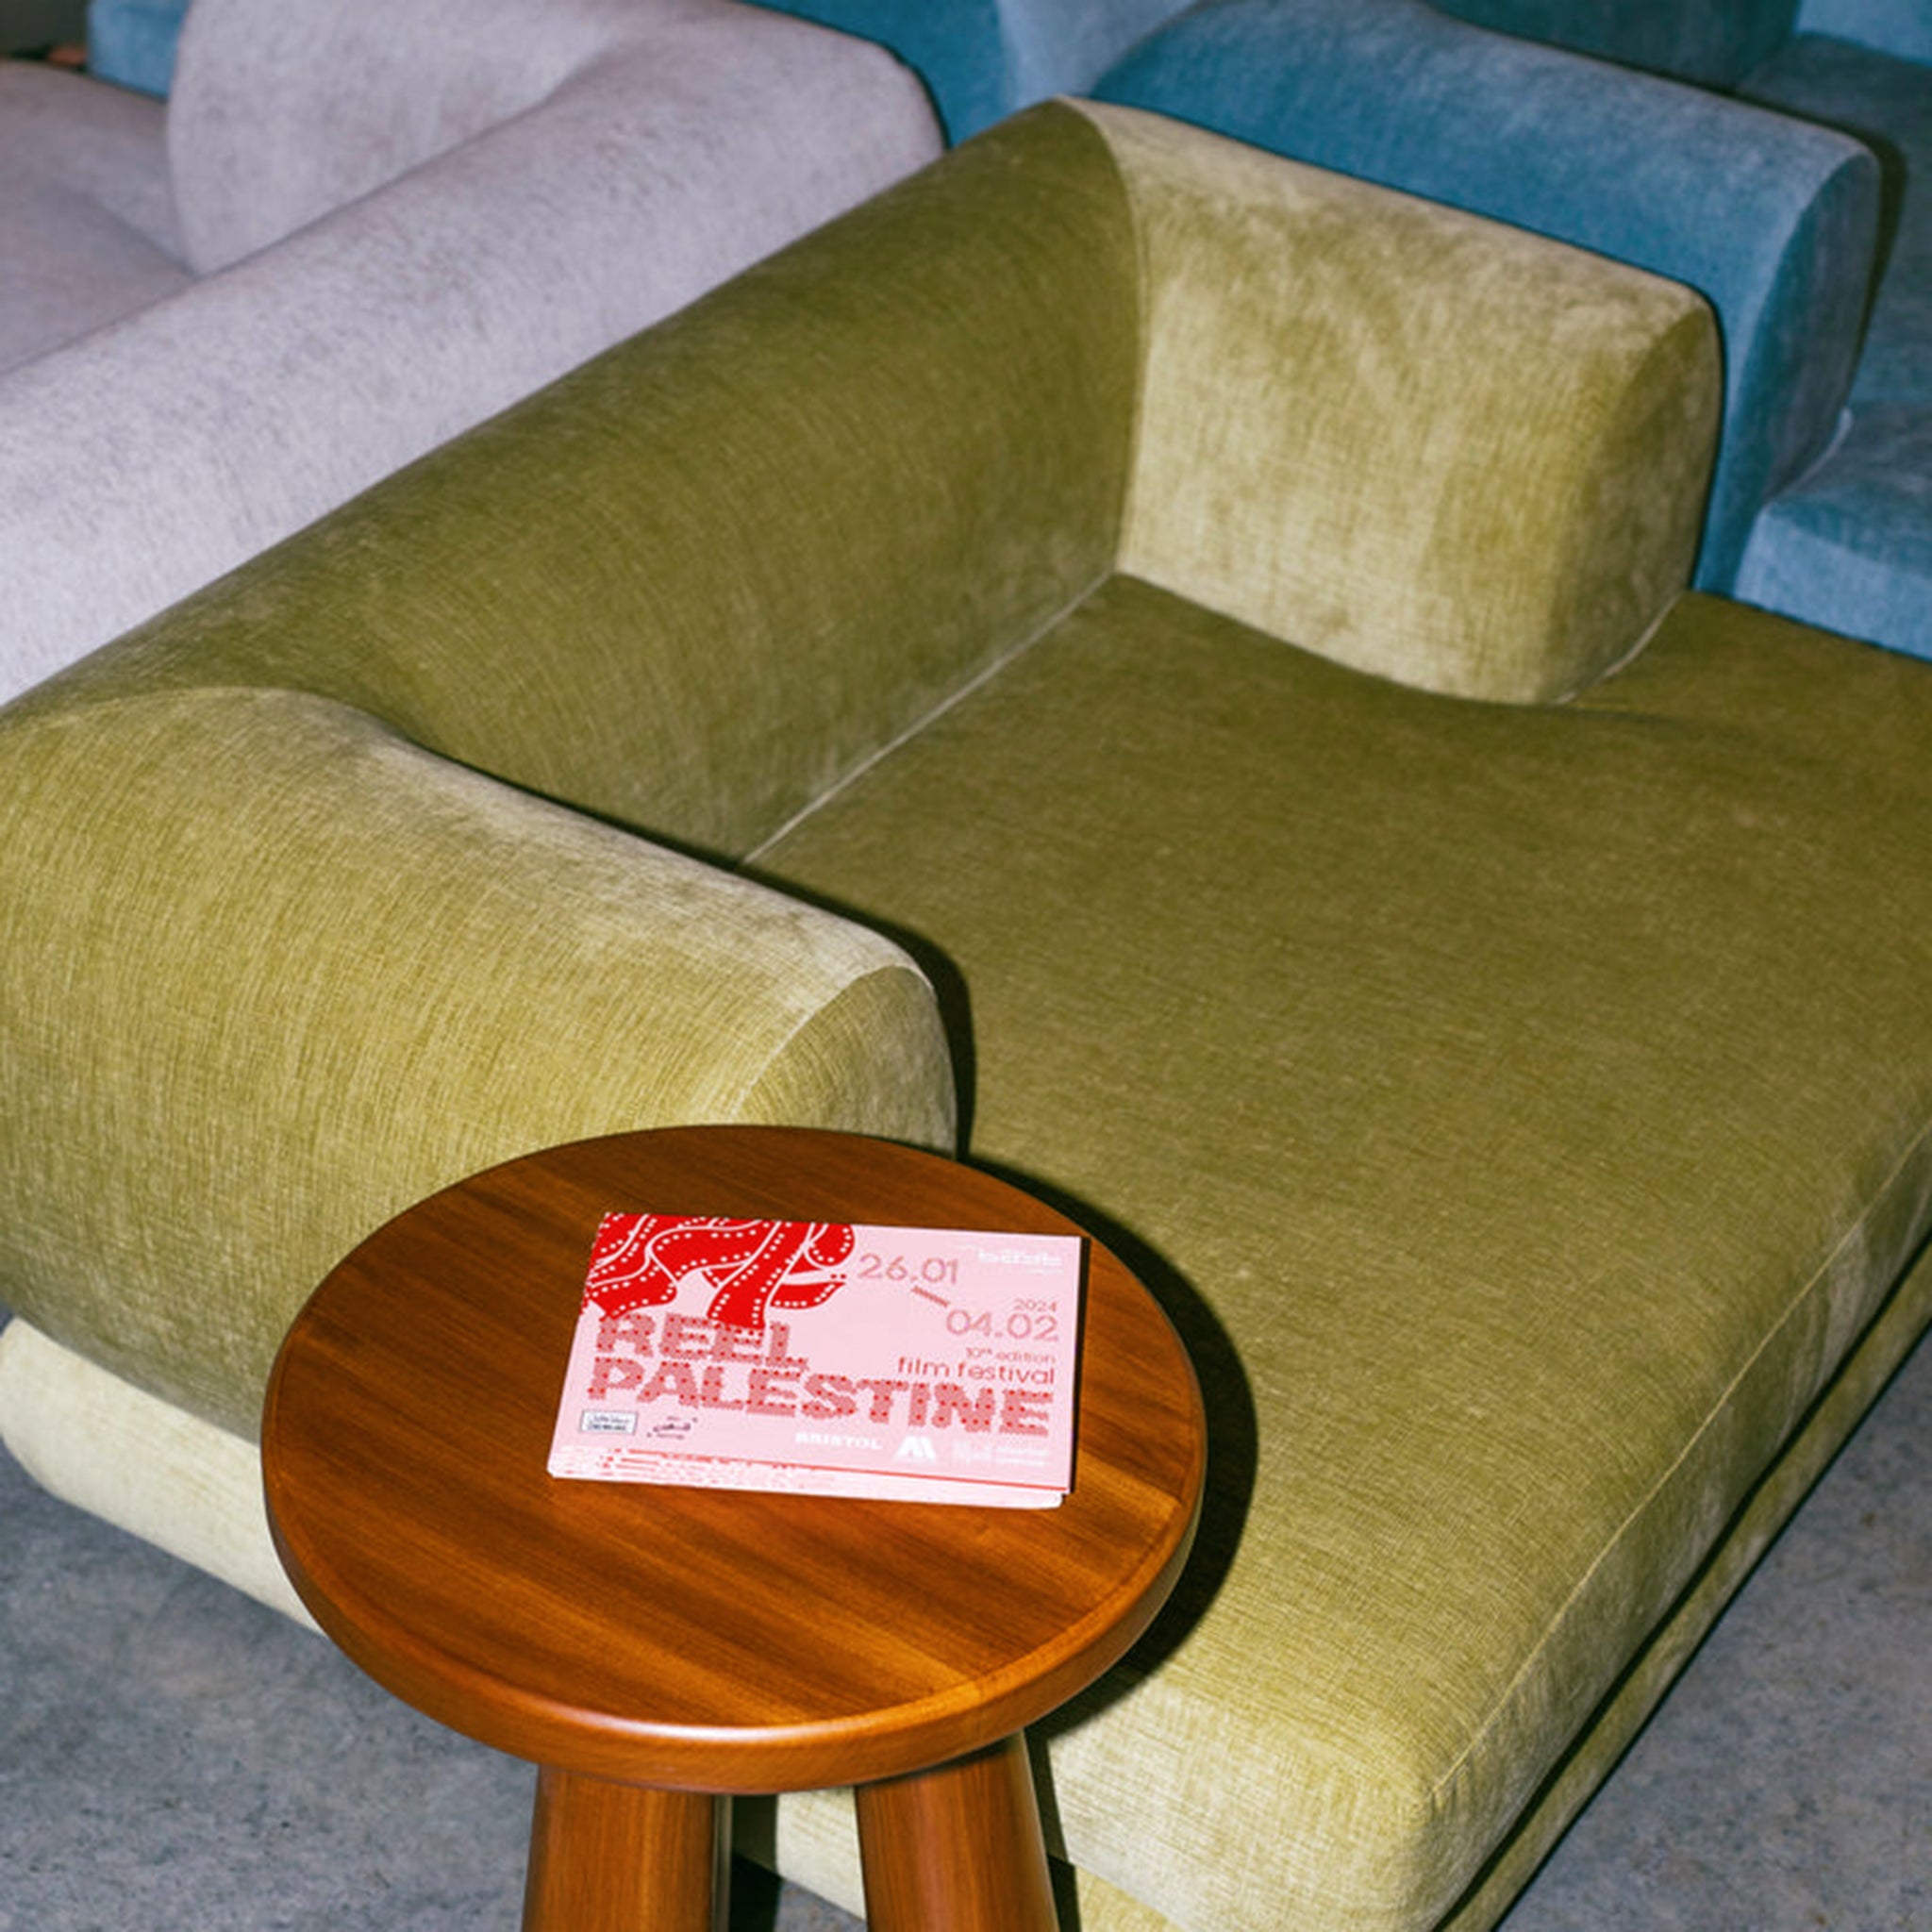 "Comfortable seating area featuring The Lewis Low Lounger Accent Chair with green upholstery, positioned next to a round wooden side table holding a pamphlet, surrounded by other colorful lounge chairs."